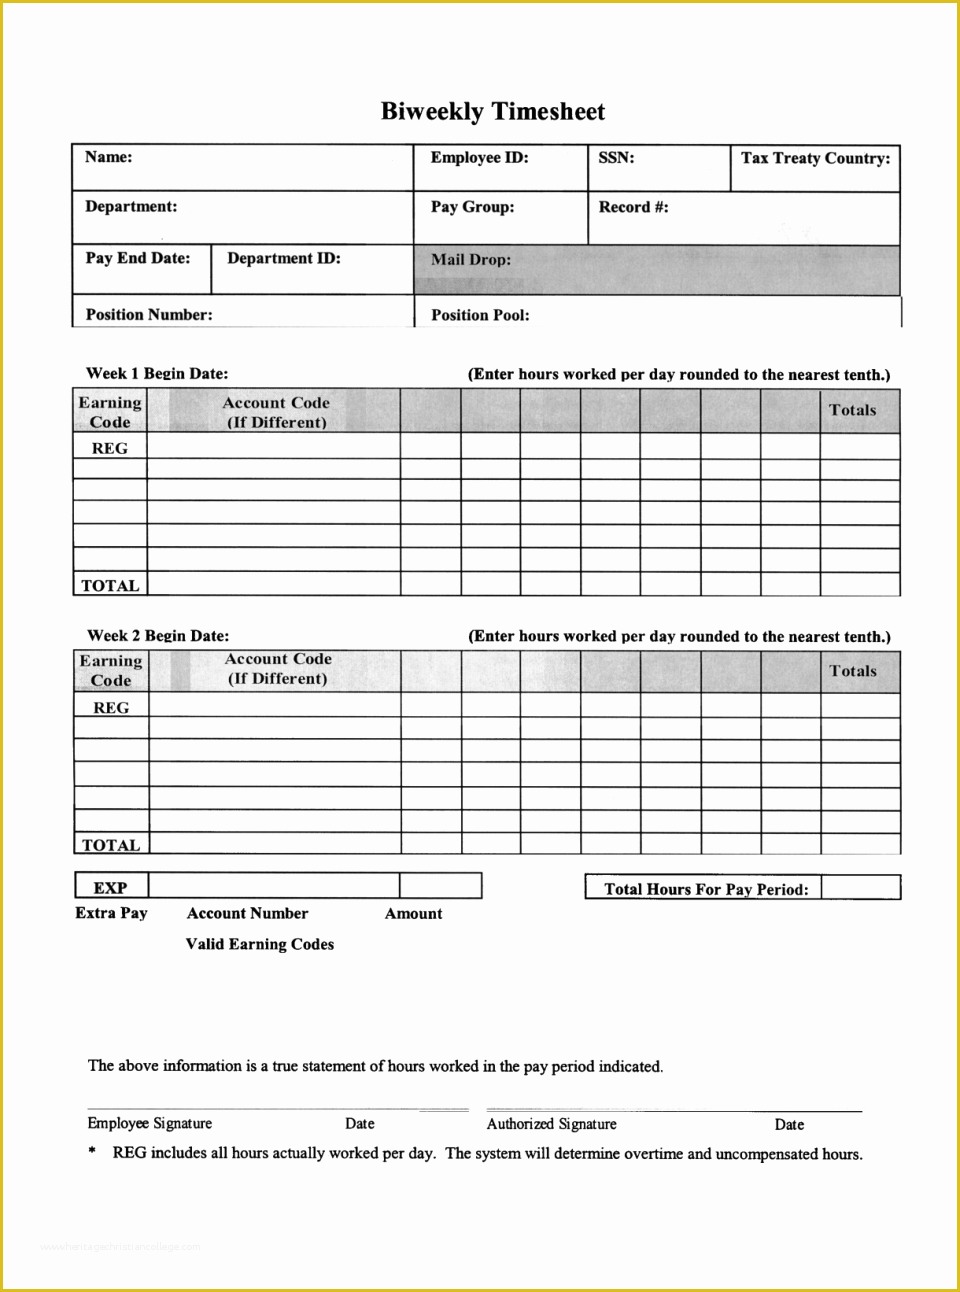 Daily Timesheet Template Free Printable Of Weekly Timesheet Spreadsheet Sheet Template Worksheet and